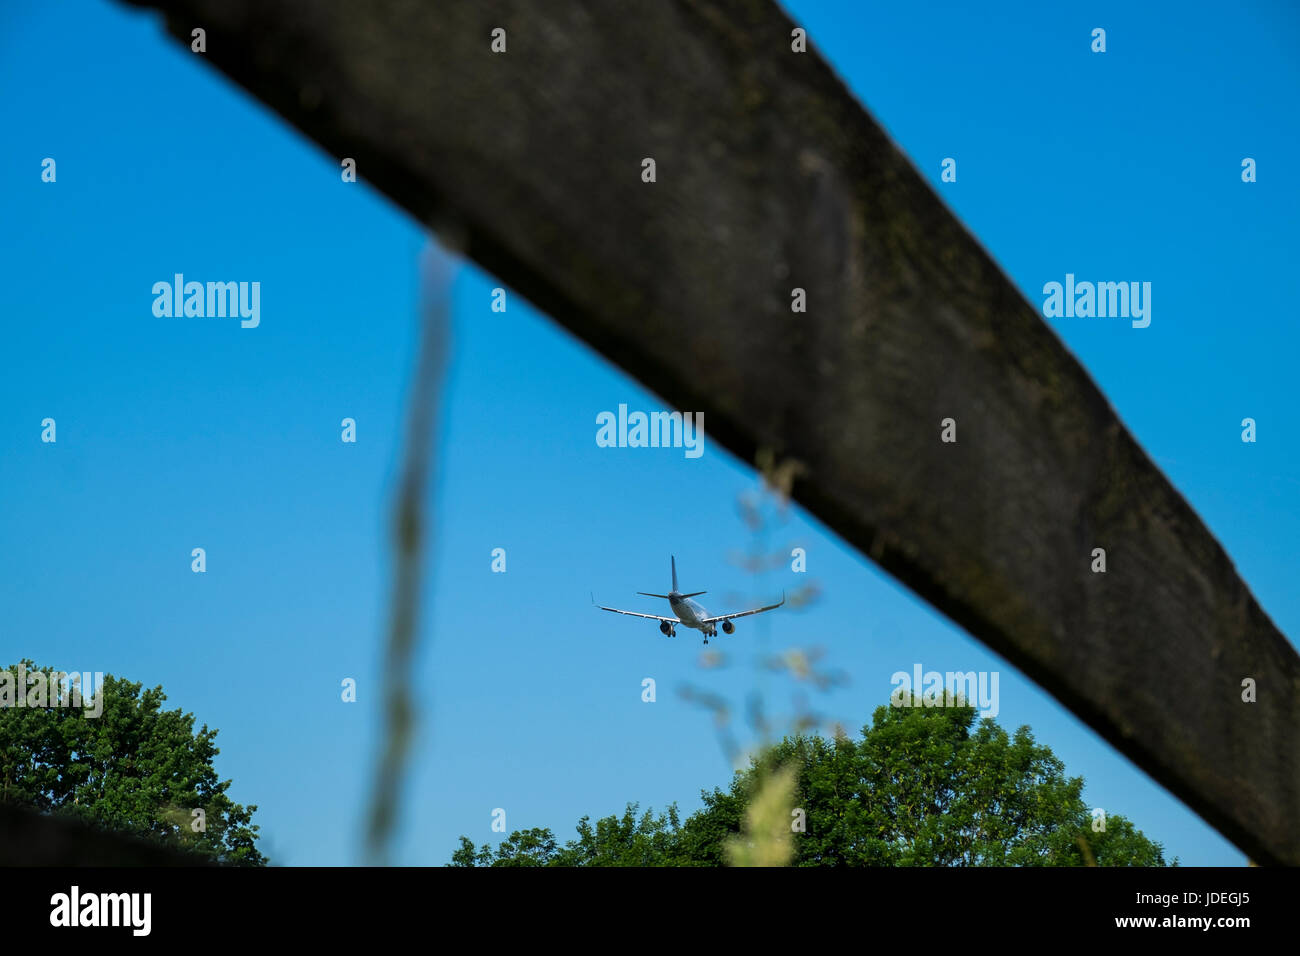 Aeroplane with landing gear down on approach to Munich airport over Schwaig district, Munich, Germany Stock Photo